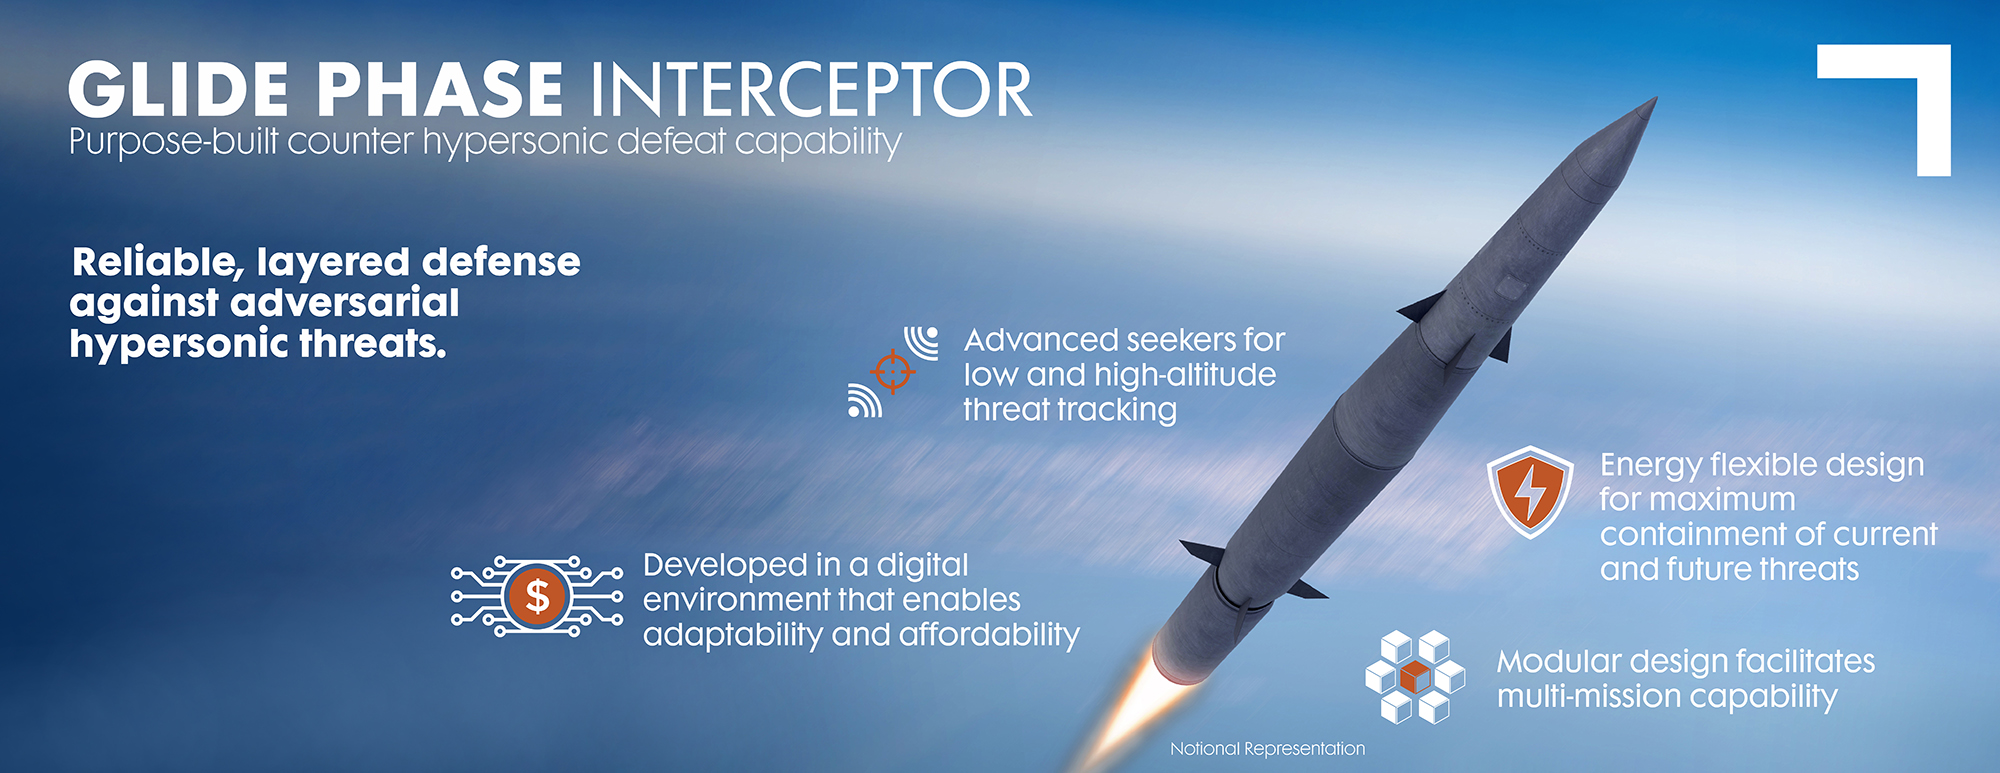 missile defense infographic